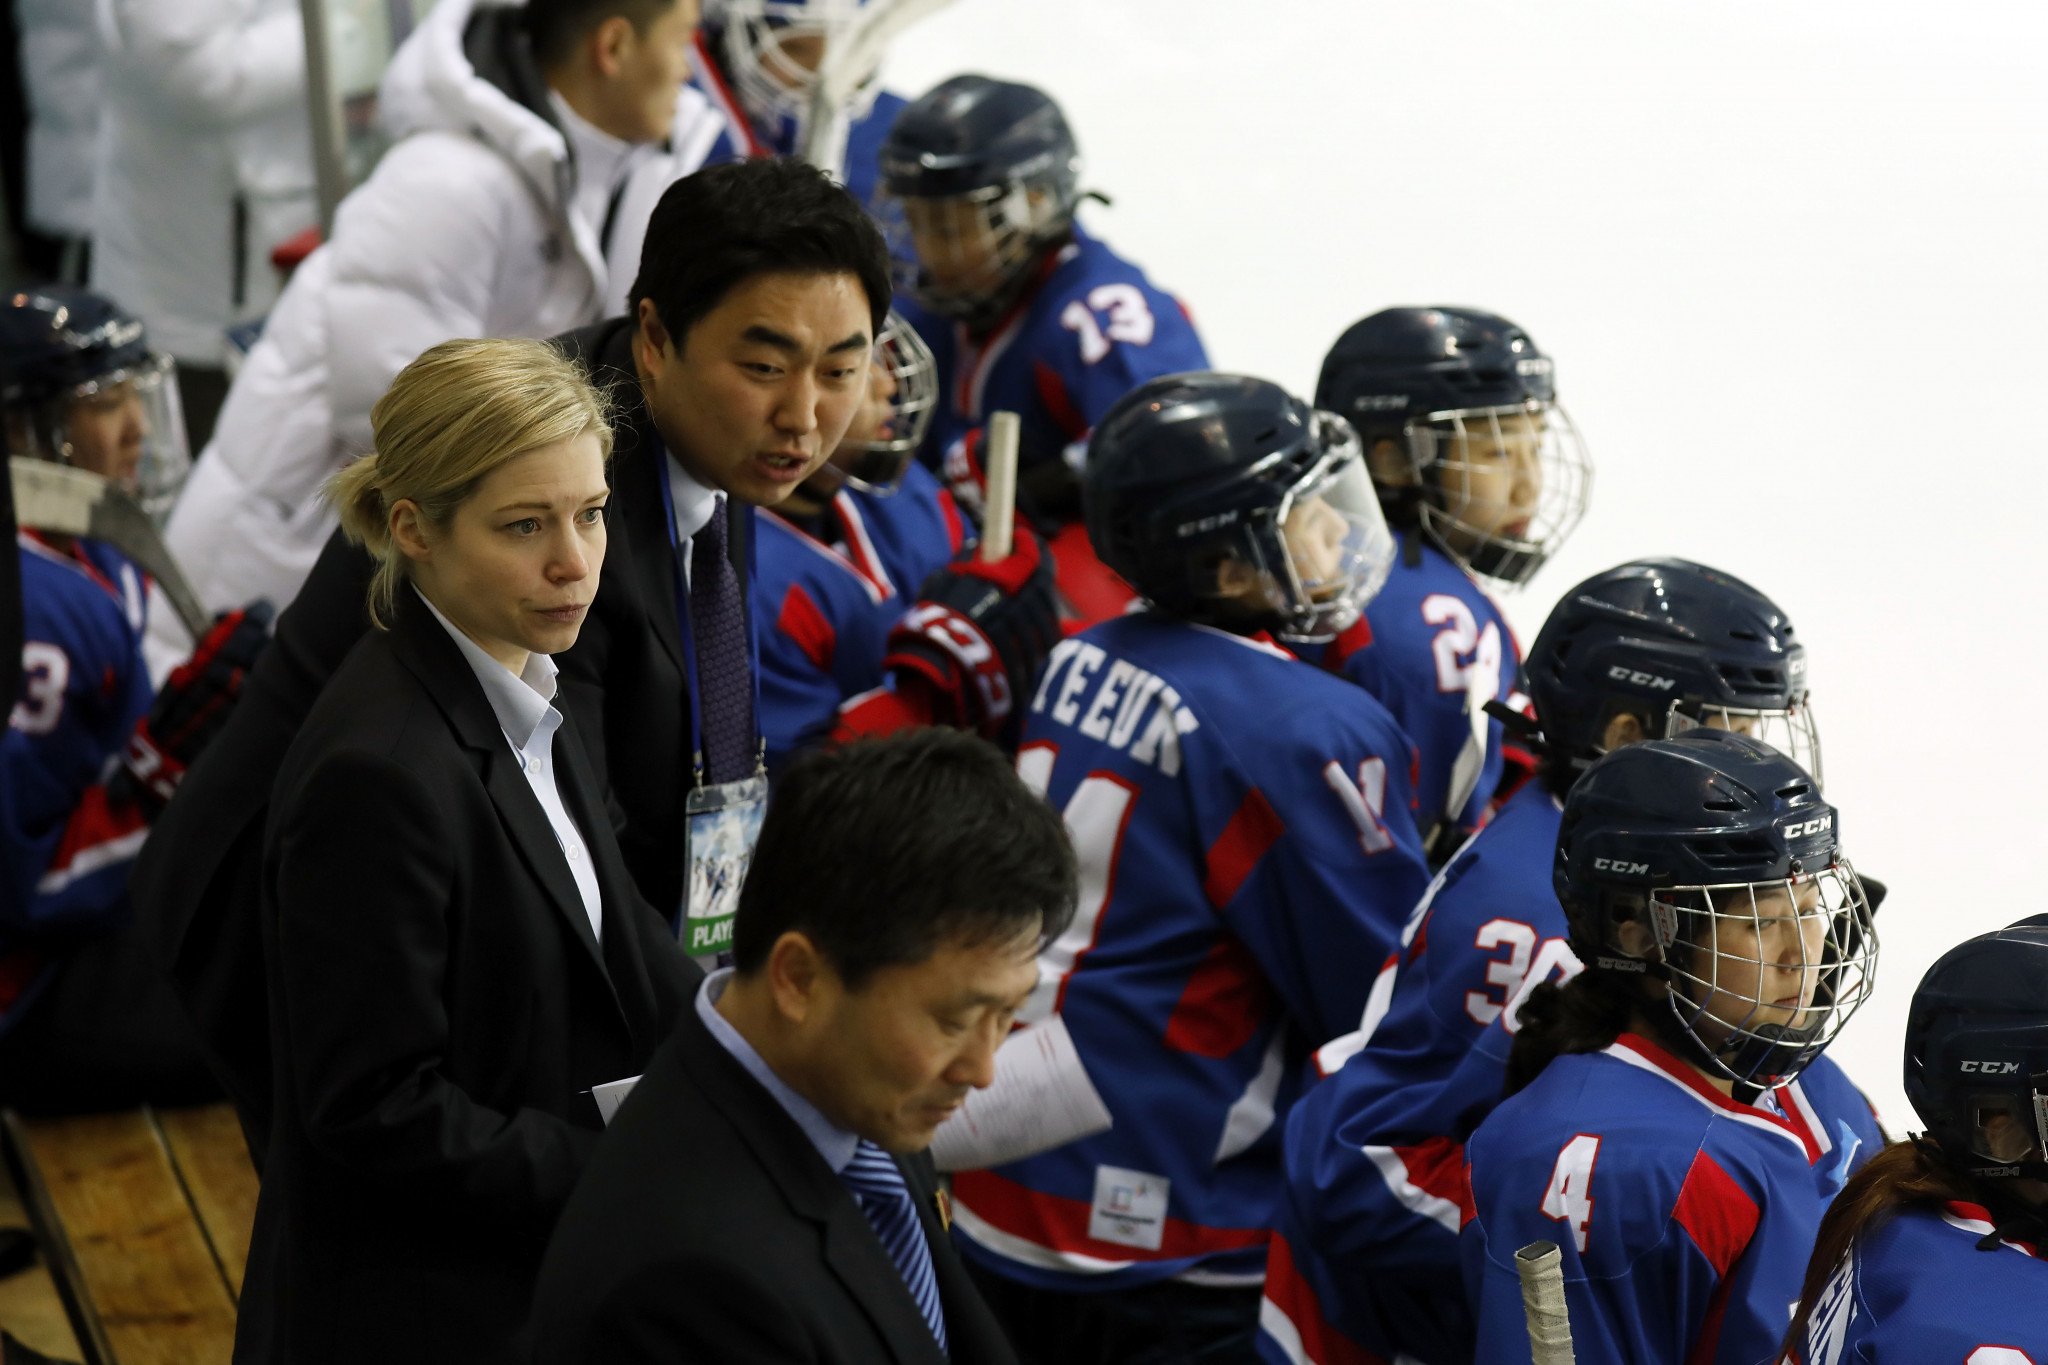 Players from North and South Korea prepare to enter the ice in the friendly encounter ©Getty Images